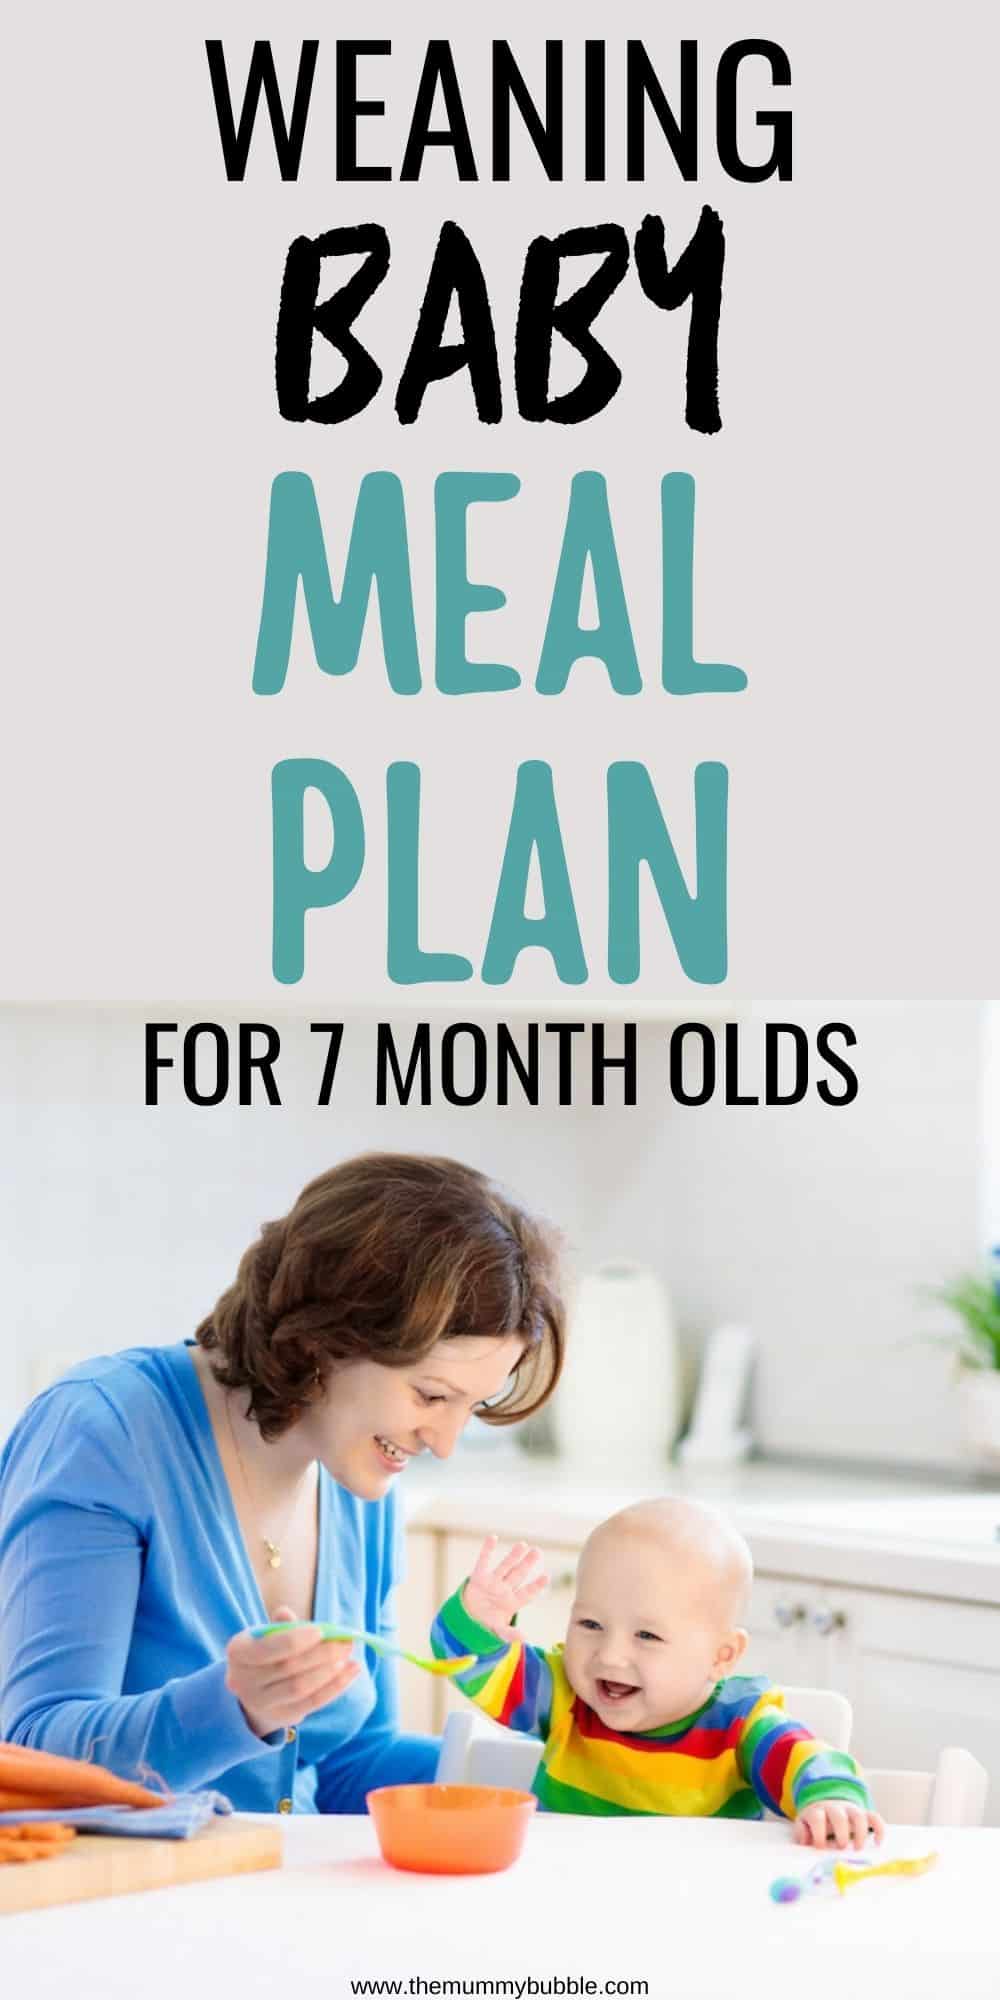 Weaning baby meal plan for 7 month olds 